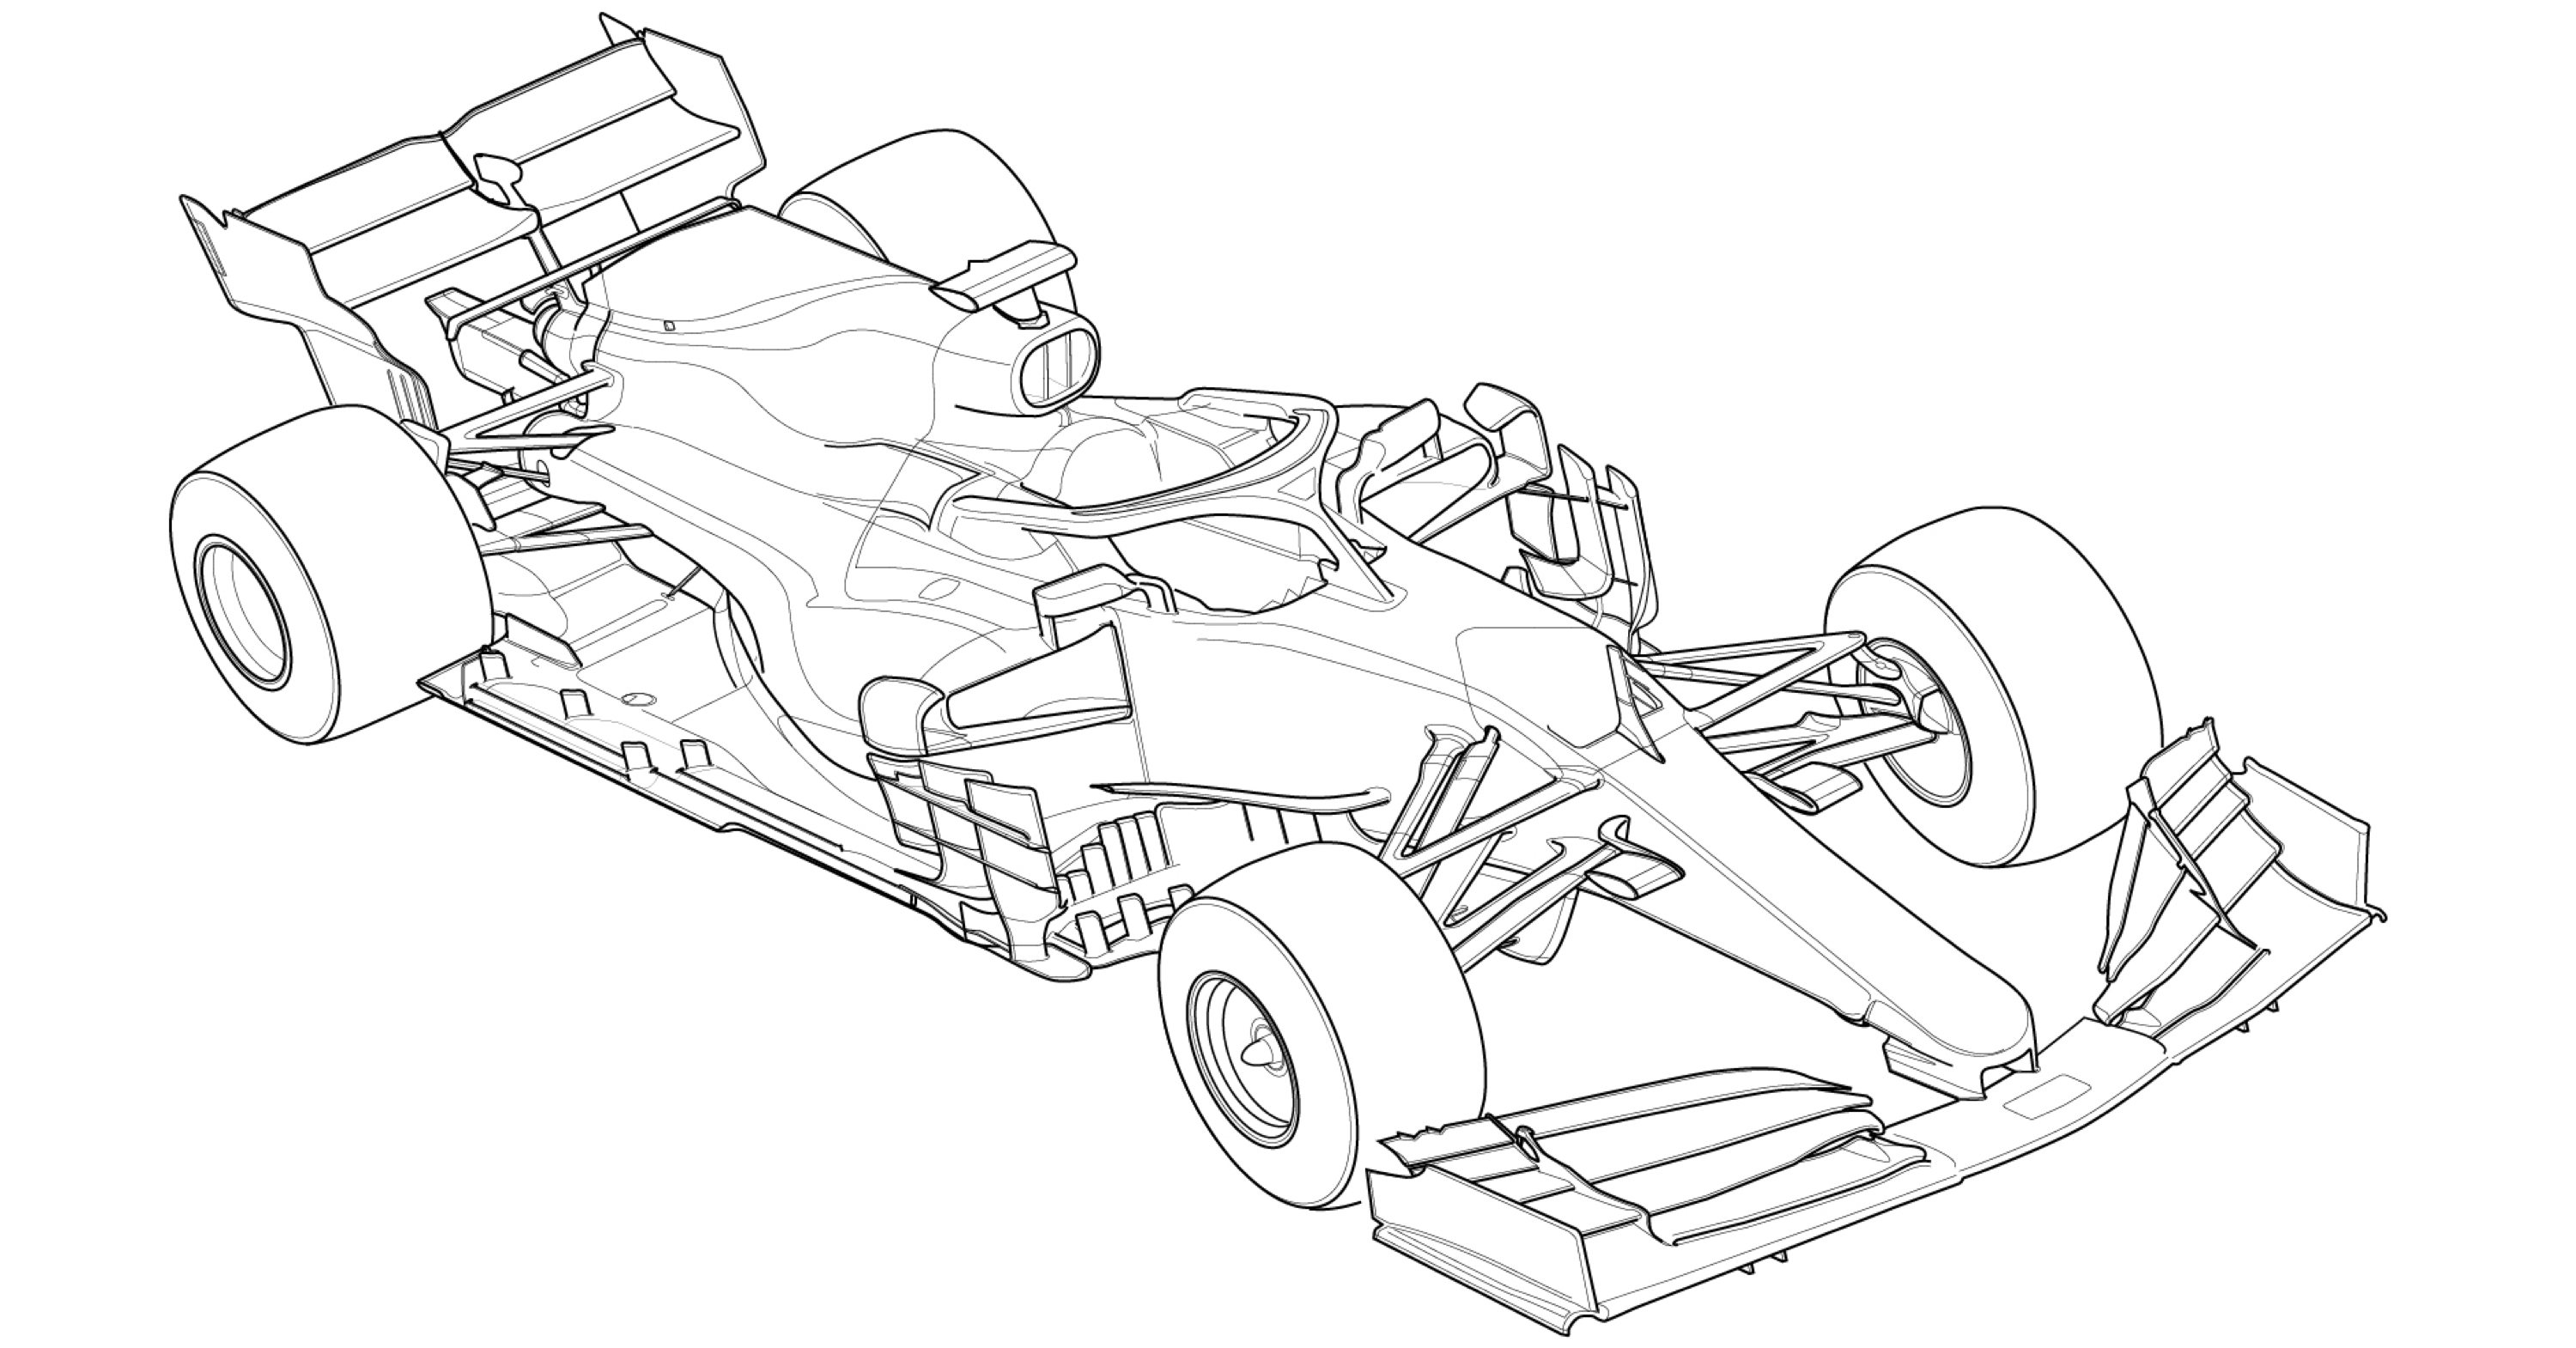 Realistic drawing of a f1 car on Craiyon